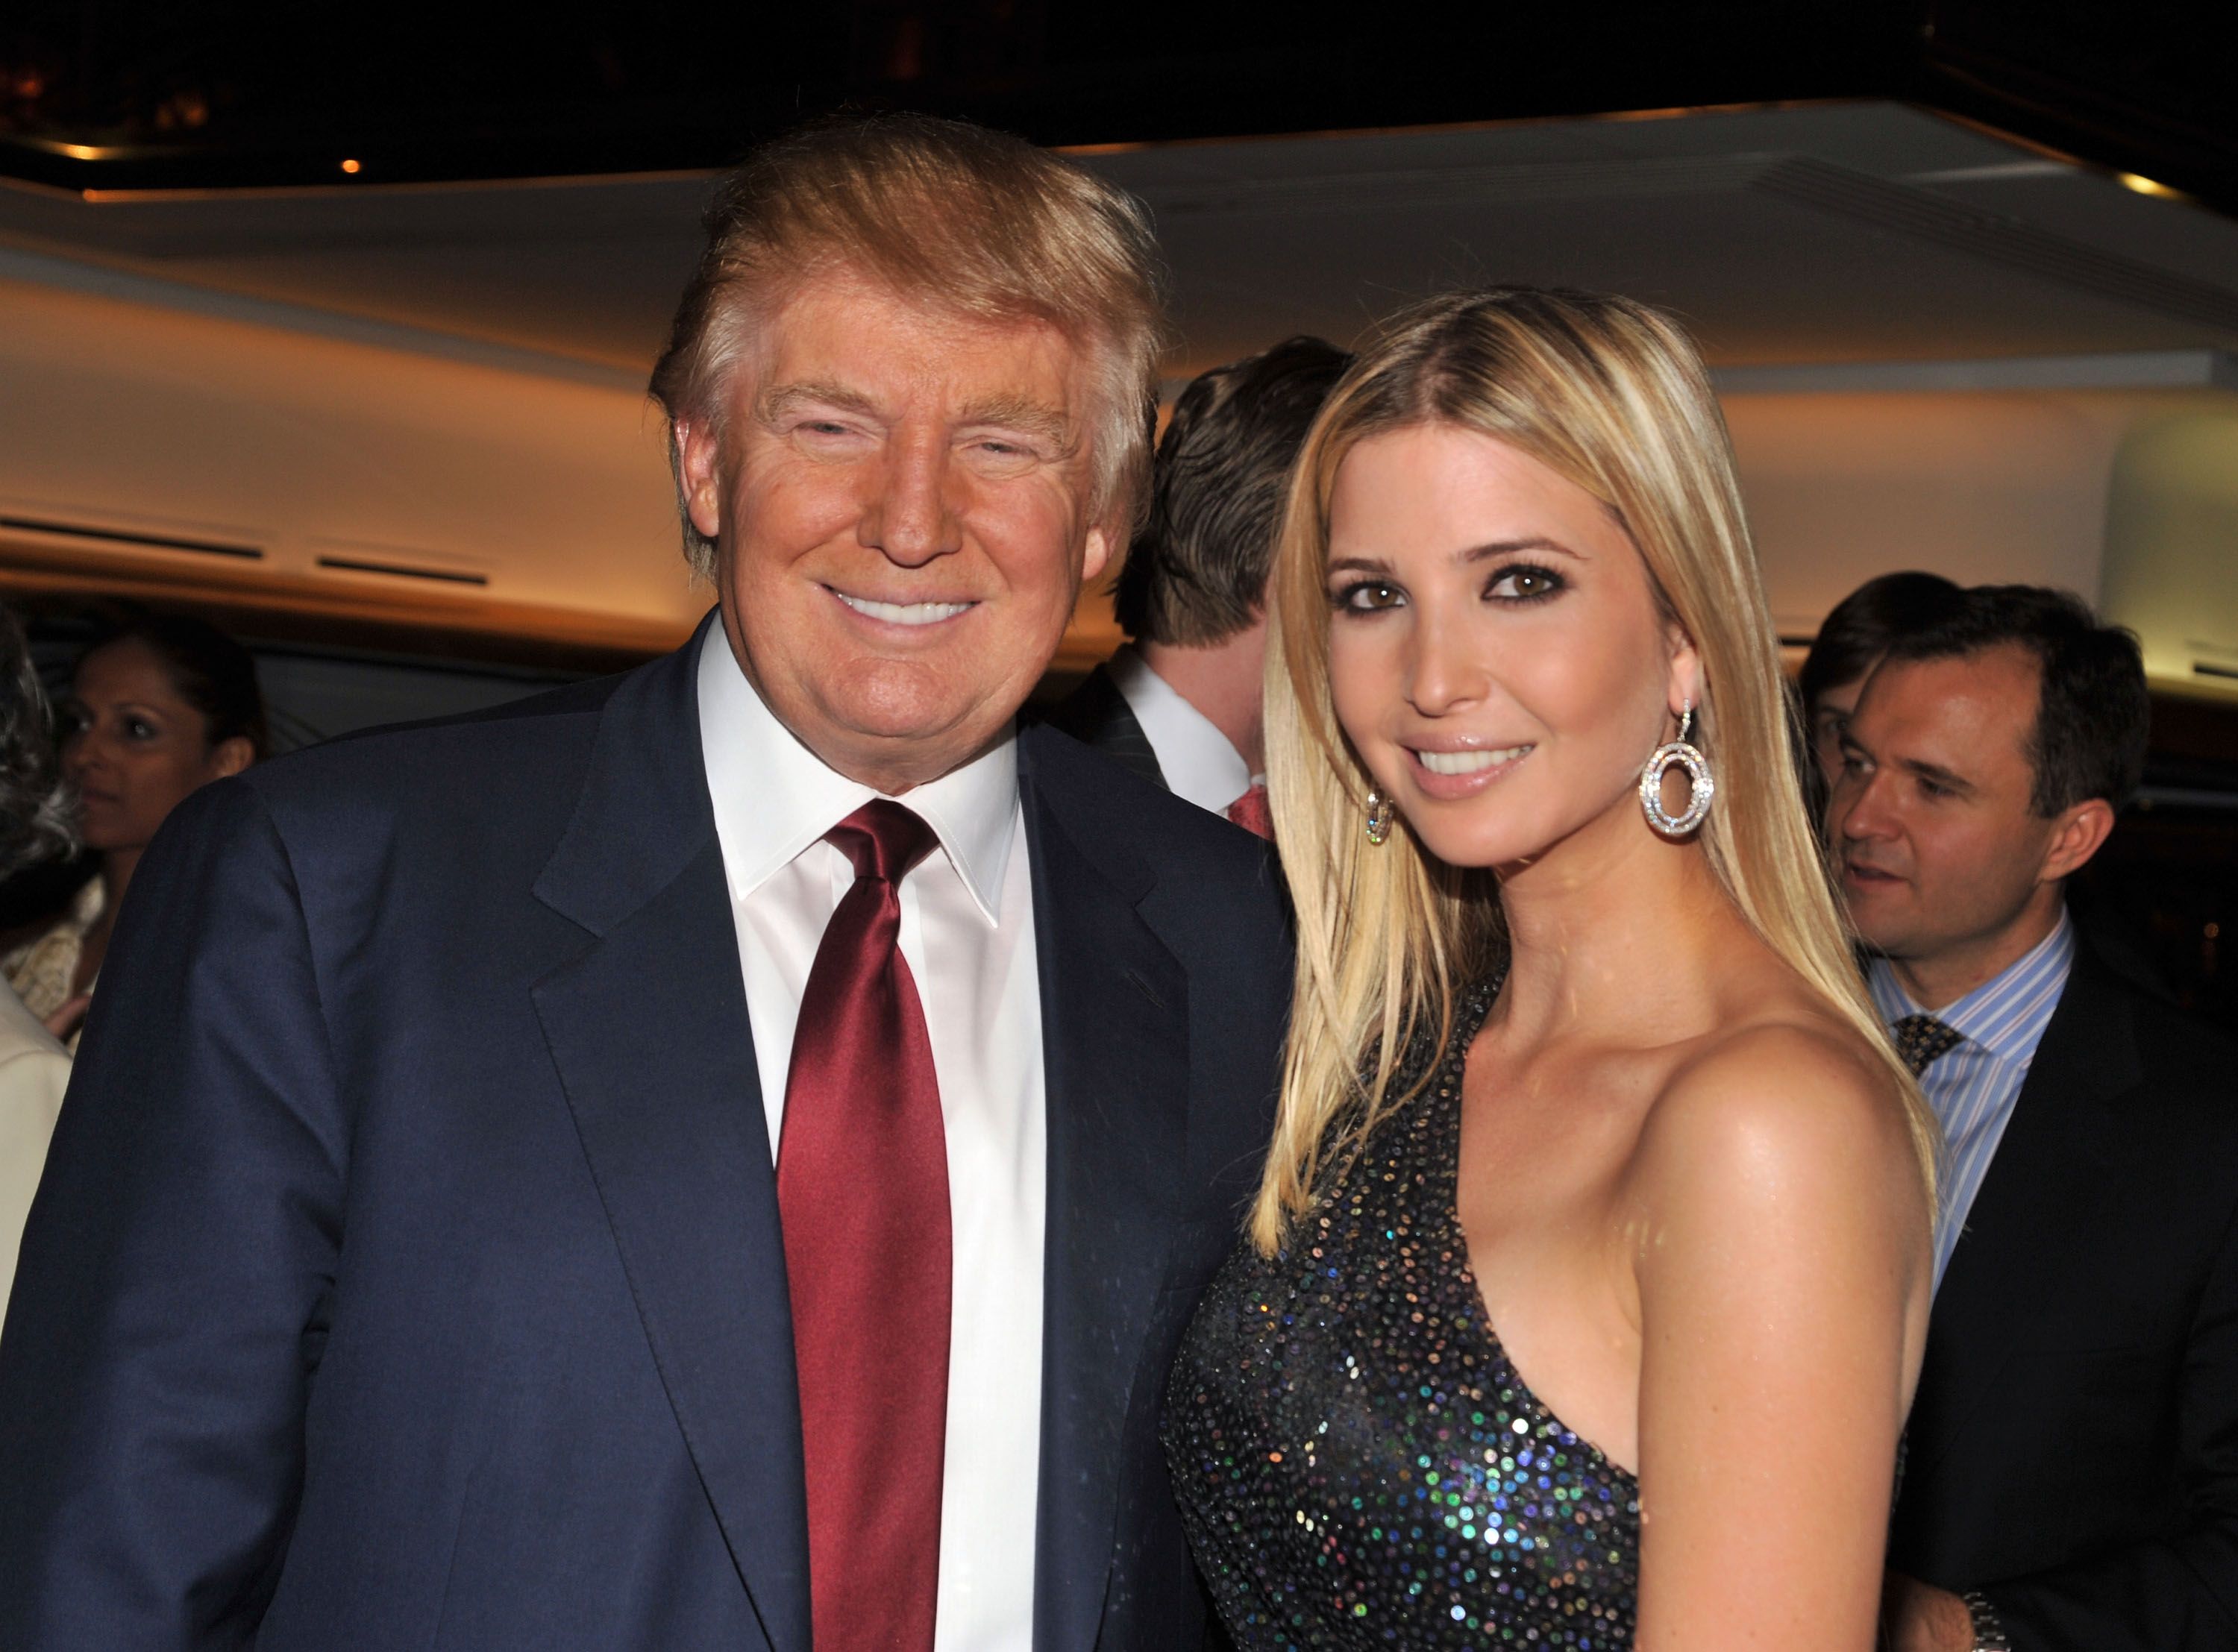 Donald Trump and Ivanka Trump attend the "The Trump Card: Playing to Win in Work and Life" book launch celebration at Trump Tower on October 14, 2009 | Photo: Getty Images